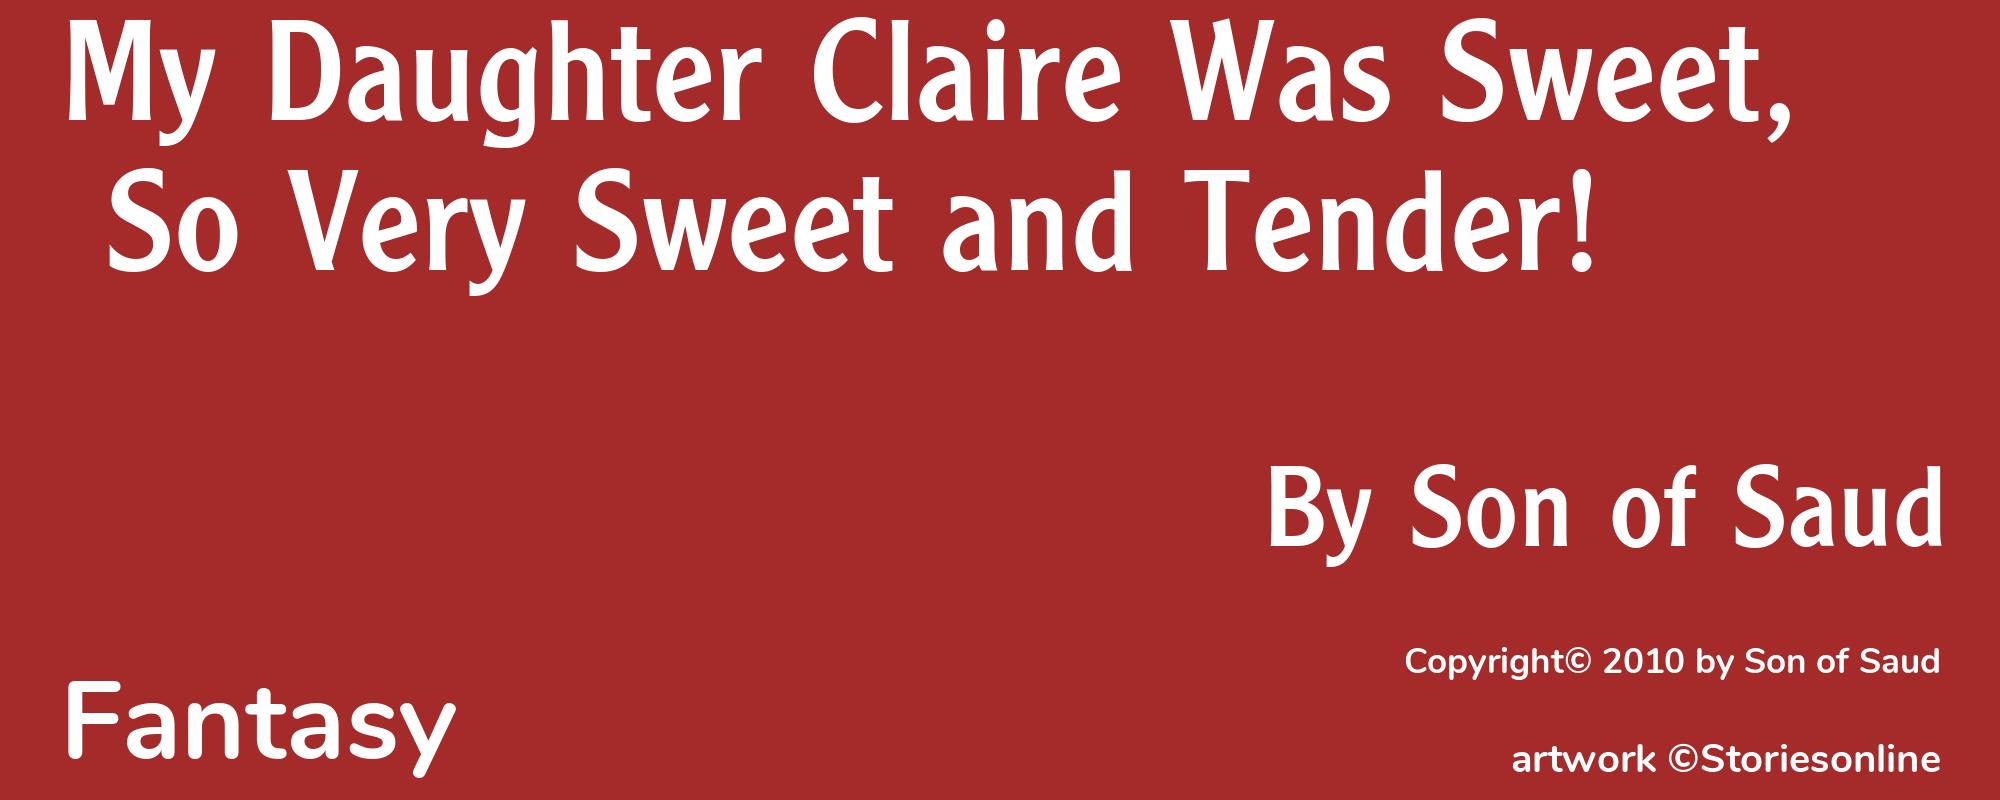 My Daughter Claire Was Sweet, So Very Sweet and Tender! - Cover